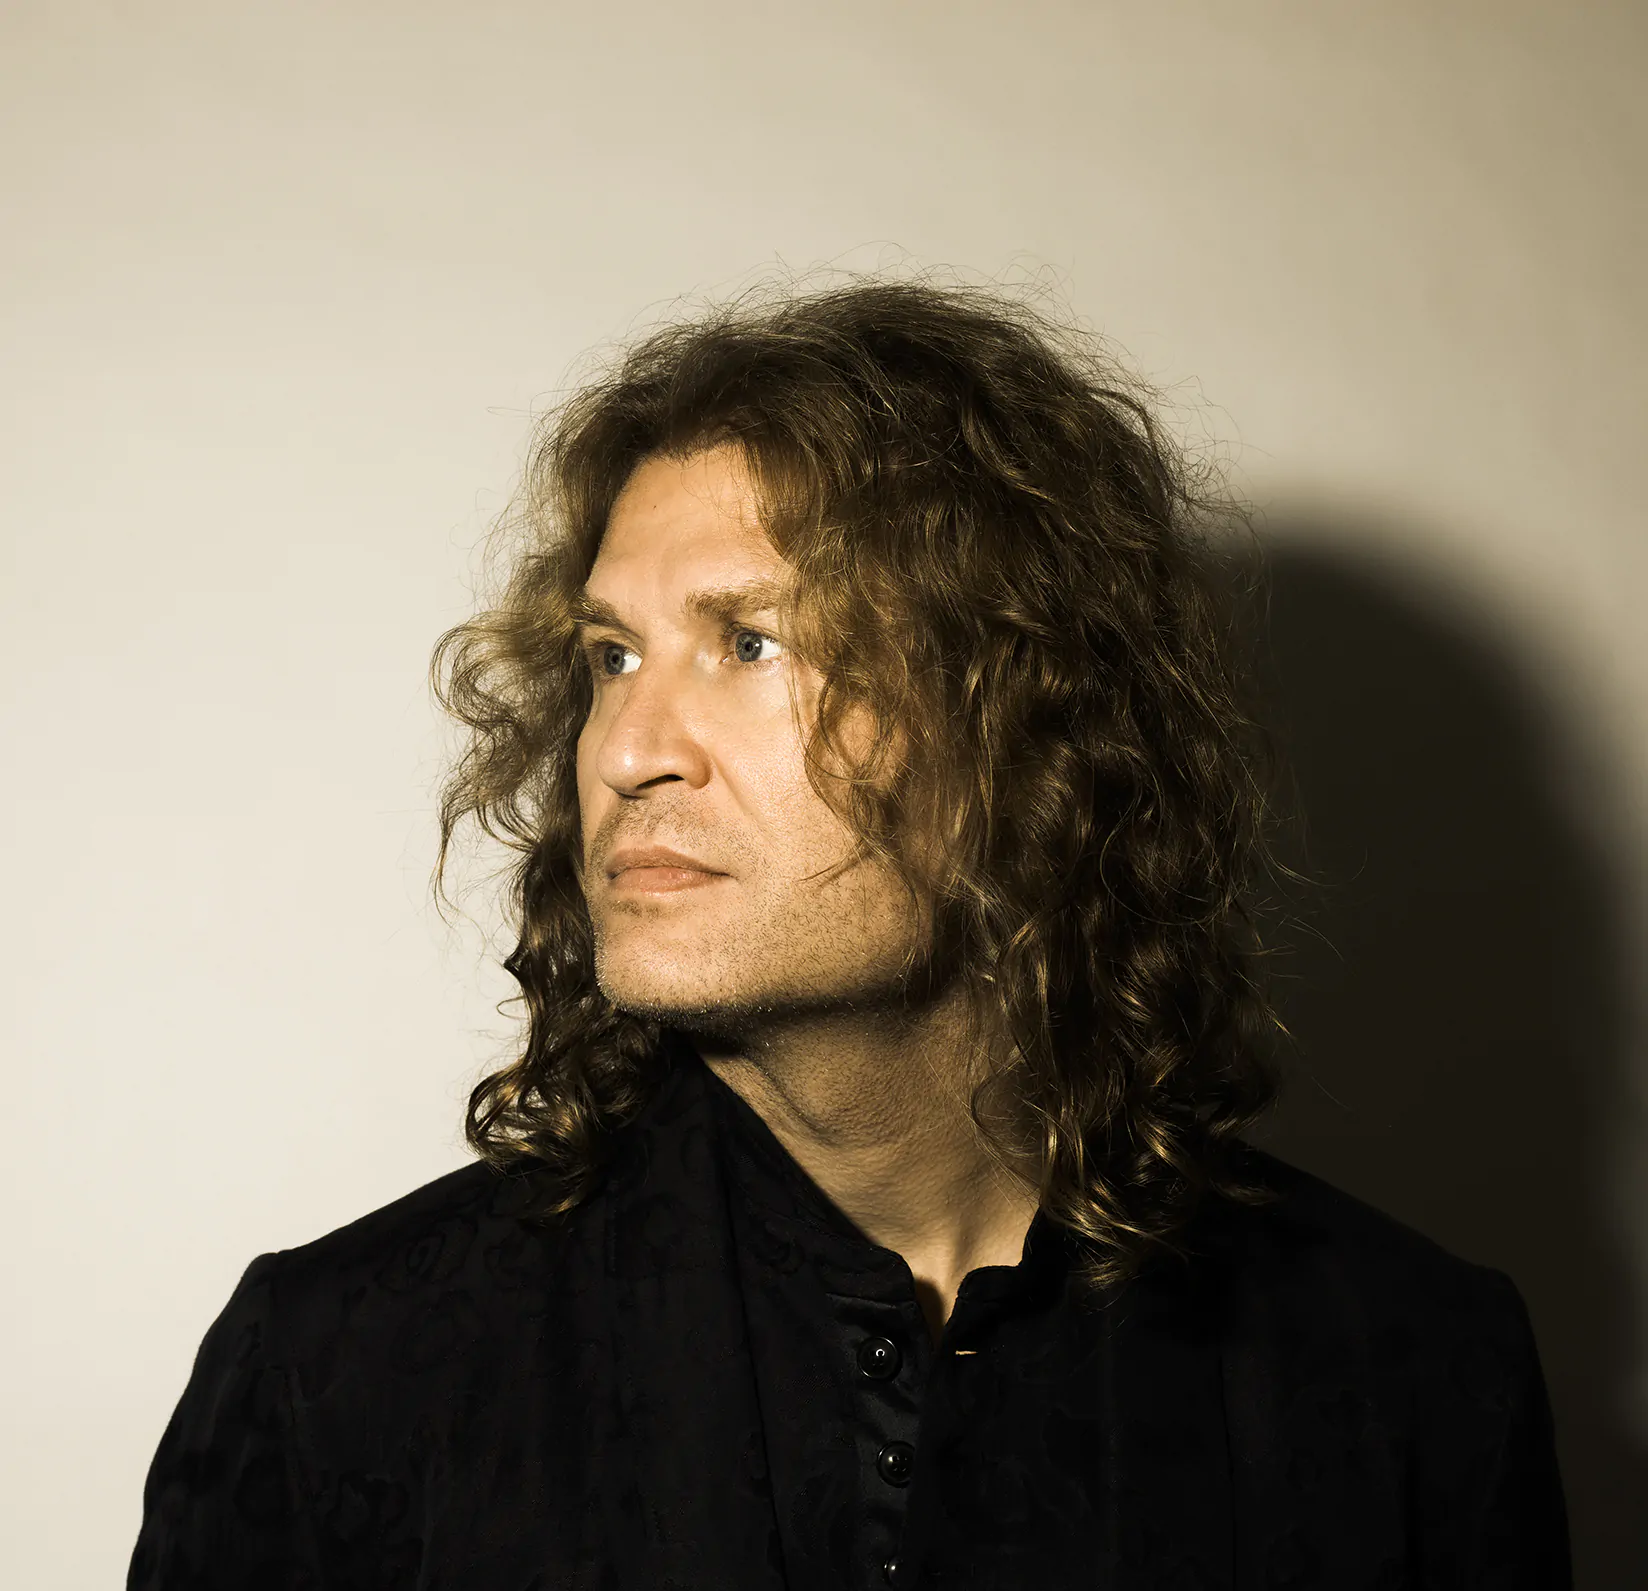 PODCAST #41: The Killers’ DAVE KEUNING on his new solo album ‘A Mild Case of Everything’